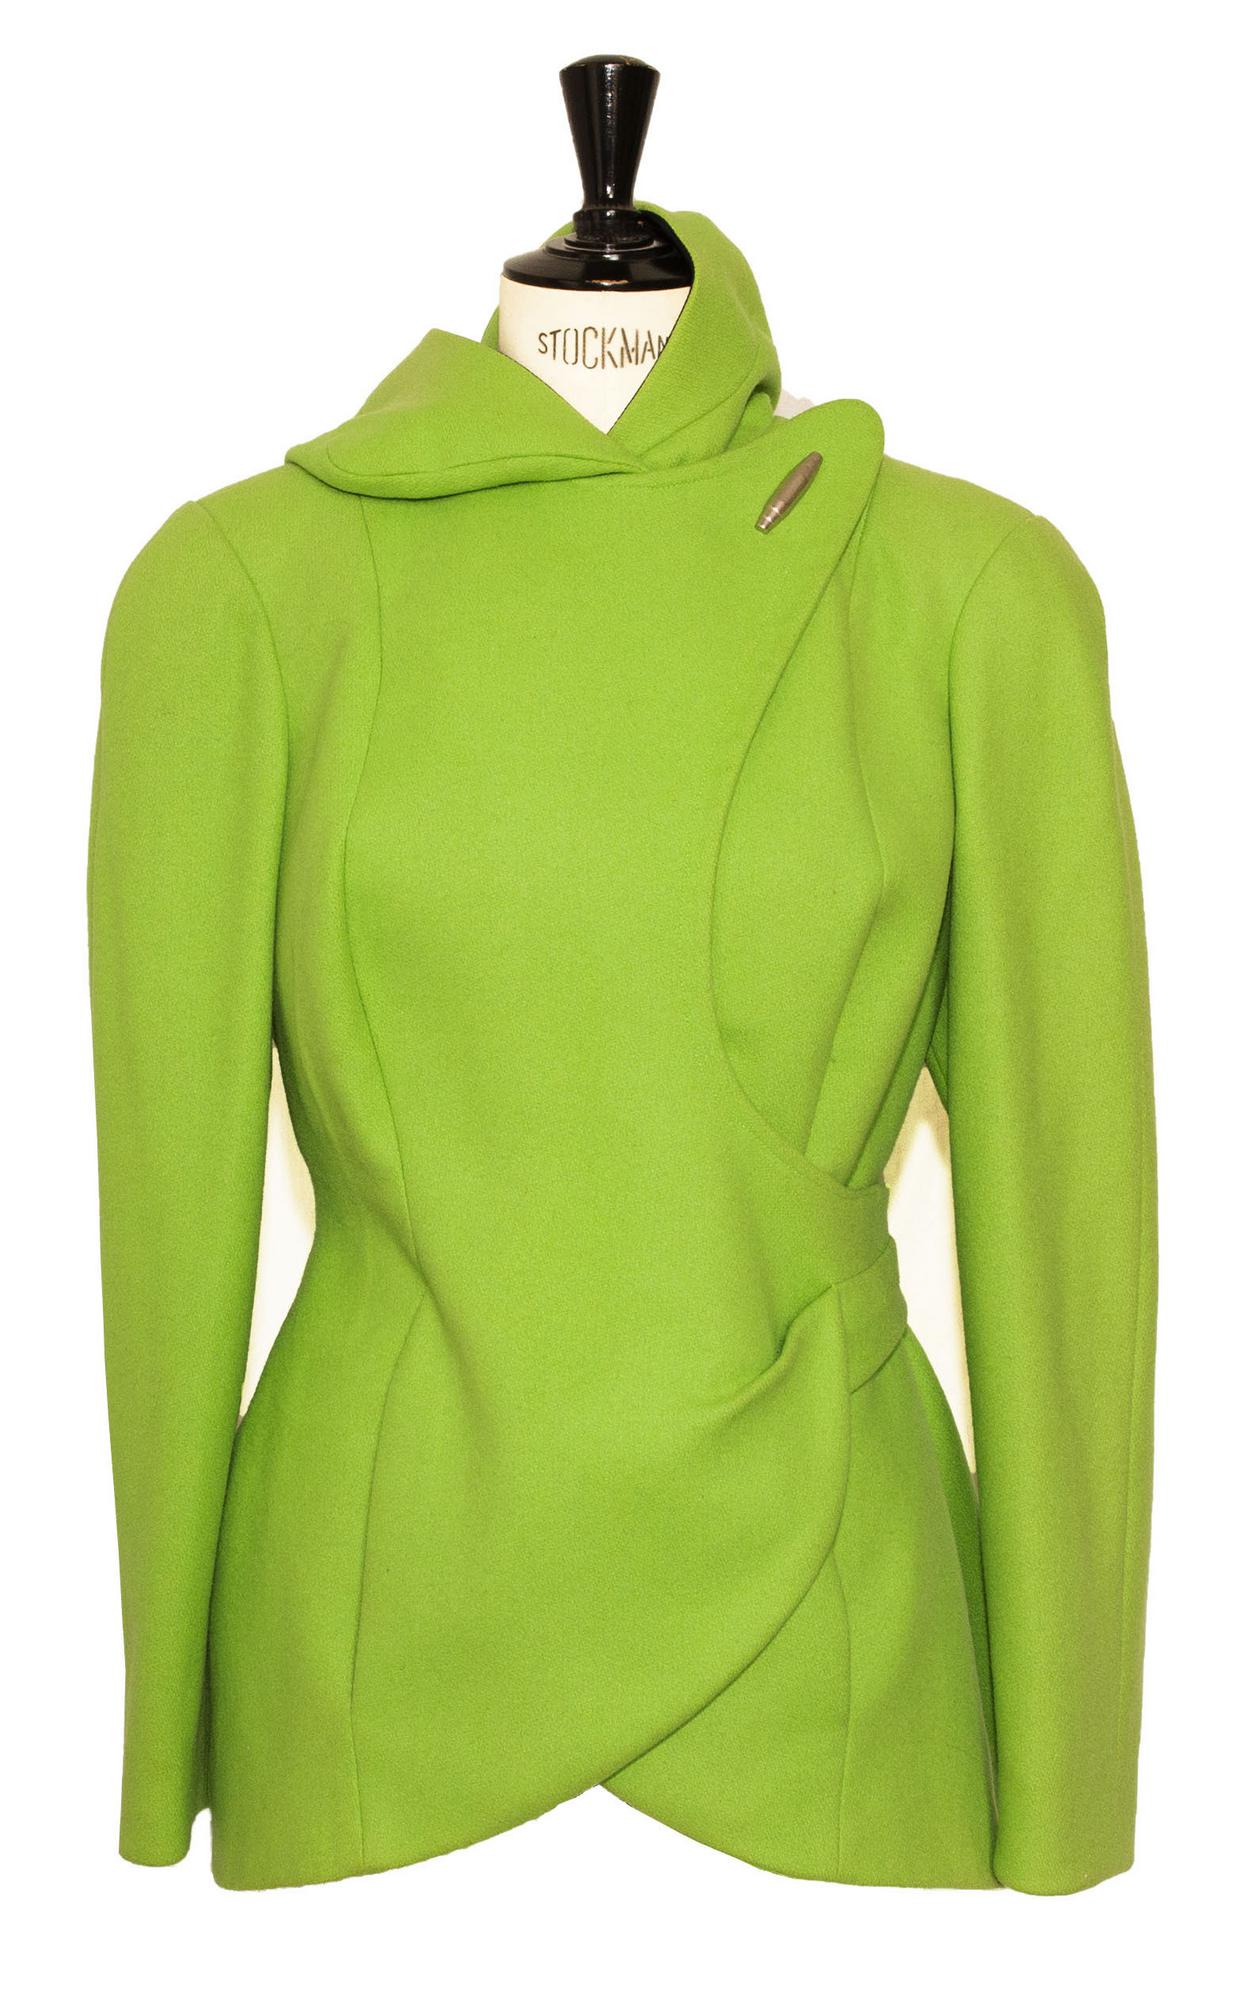 Thierry Mugler ELECTRIC JACKET Description: Jacket labeled as Thierry Mugler...